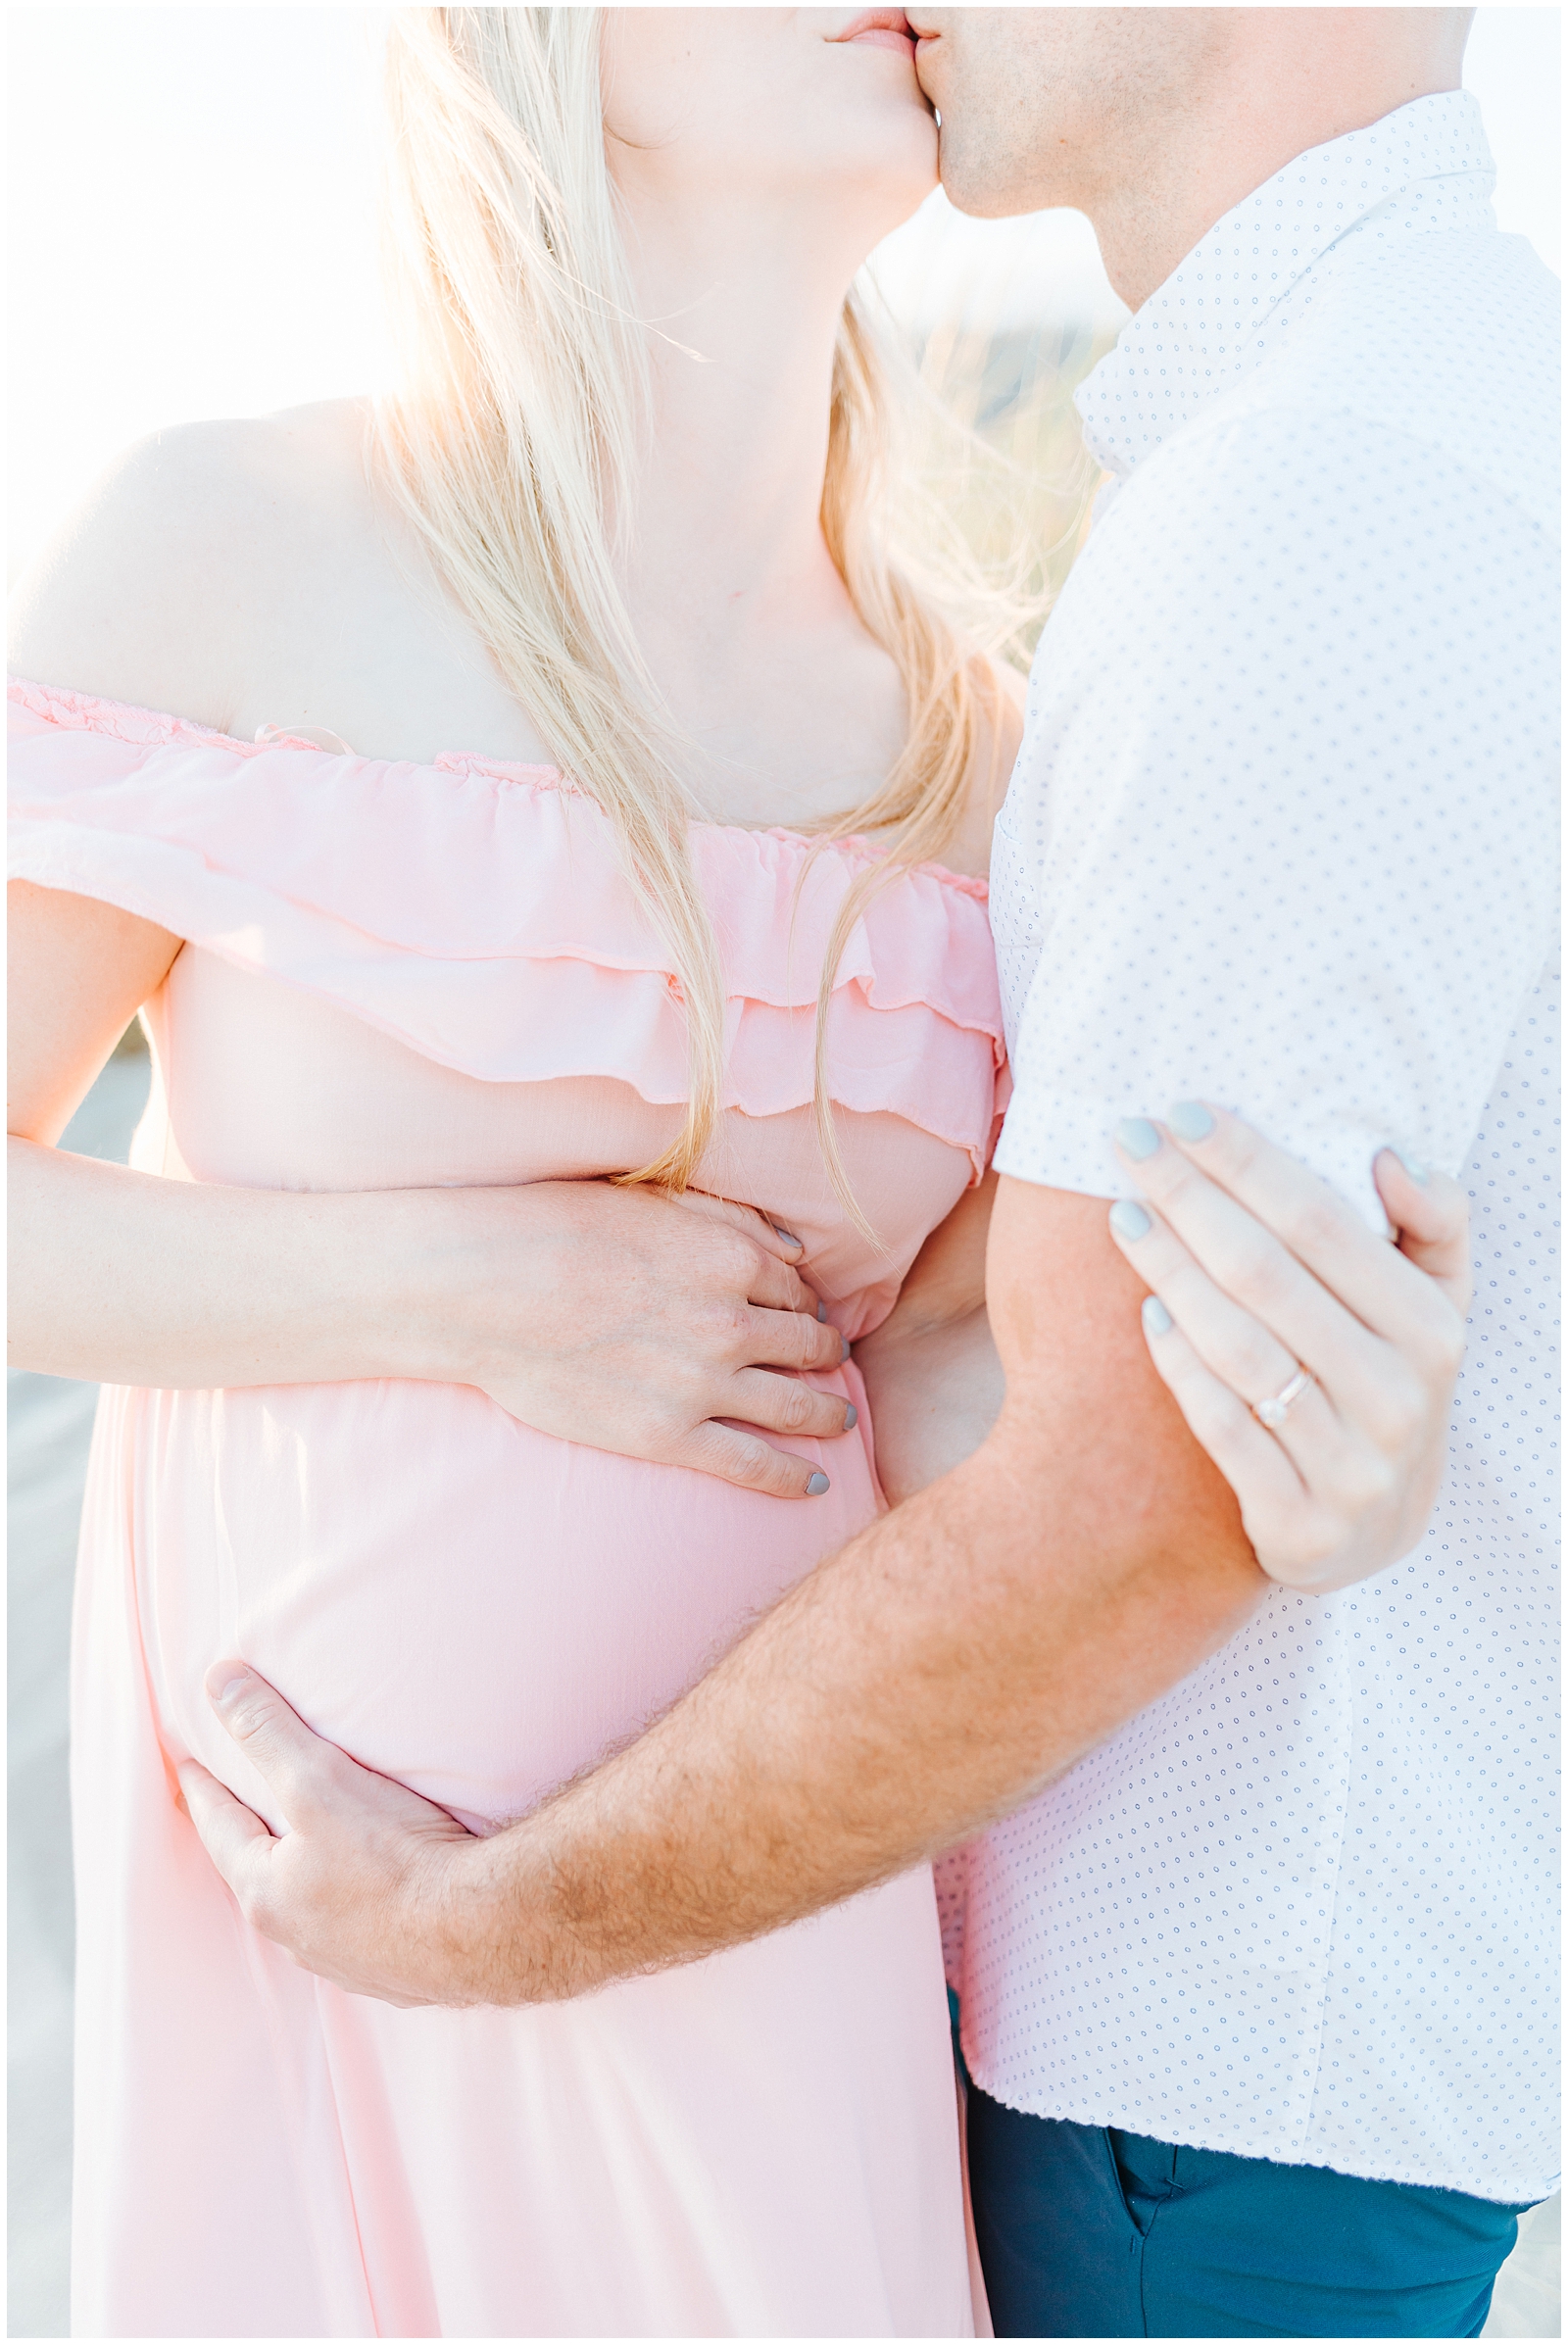 Beachy Maternity Session Outfits with Ruffled Light Pink Dress and White and Navy